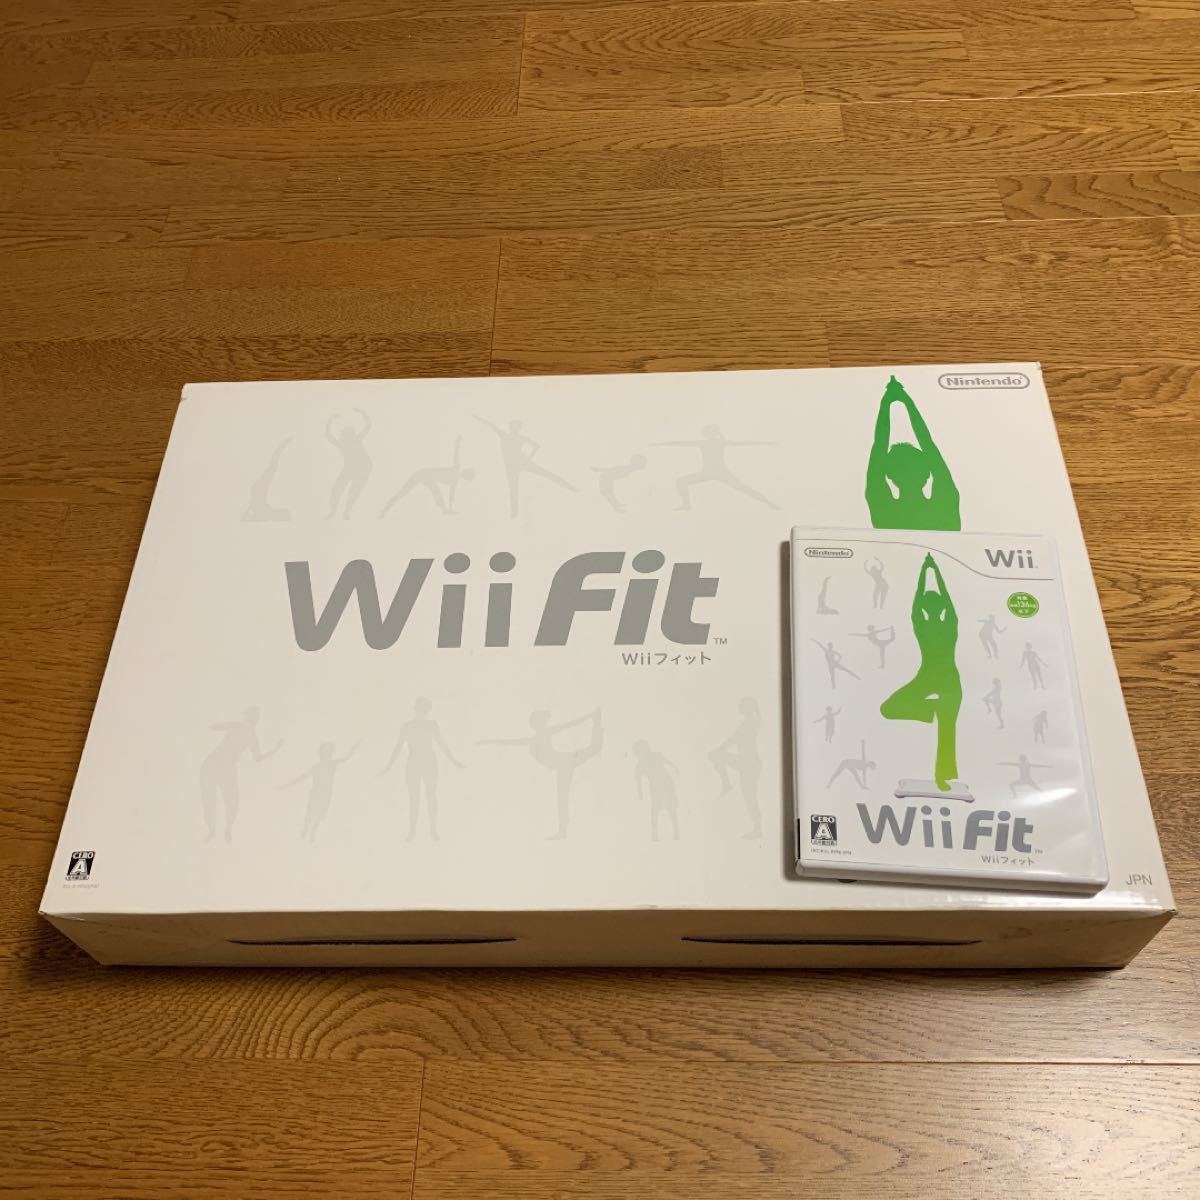 Wii Fitバランスボート&ソフト